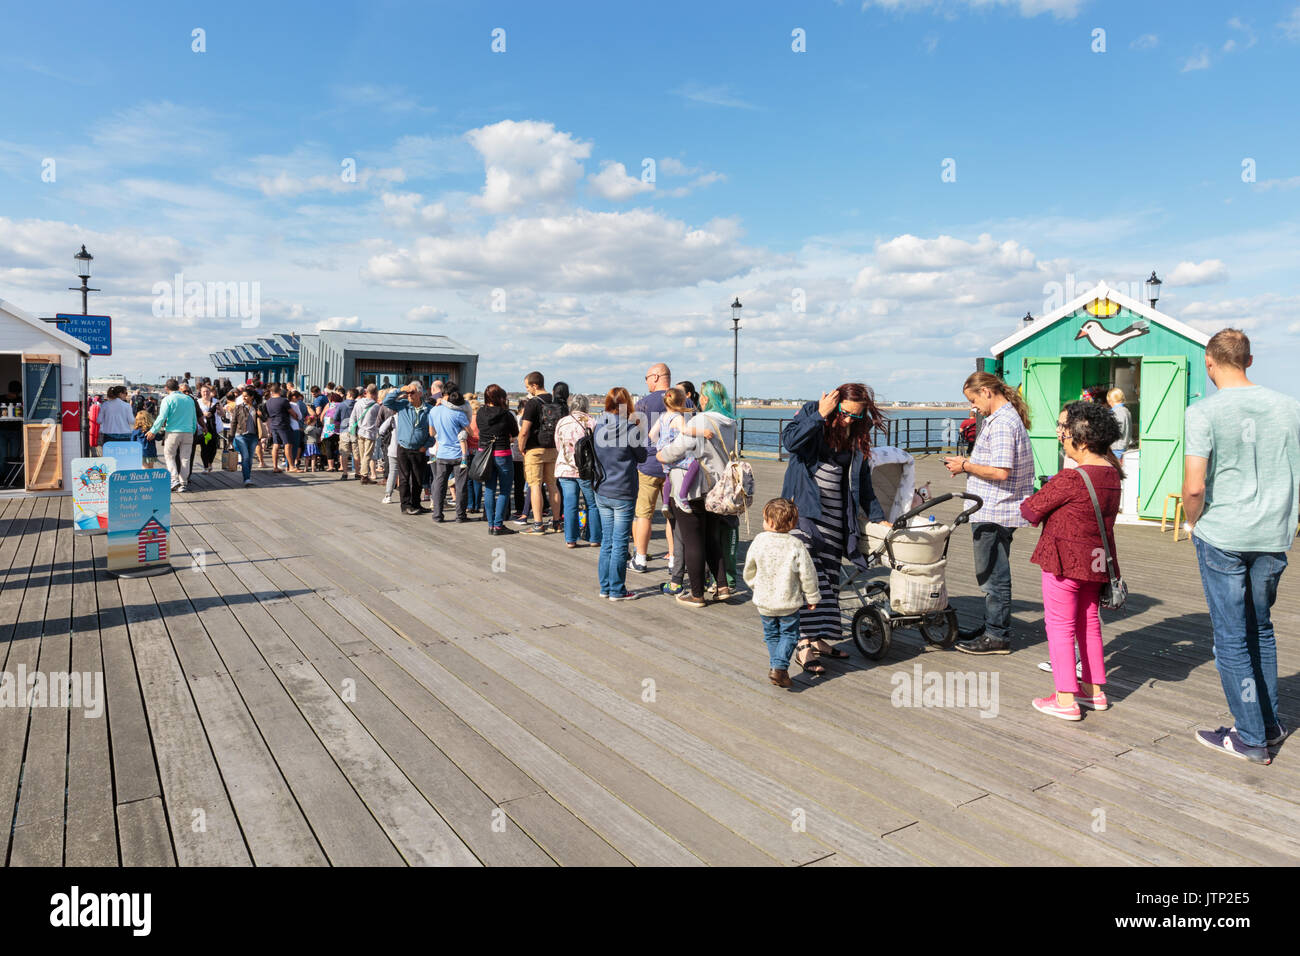 Long queue of people waiting for the Southend Pier Railway, Southend-on-Sea, Essex, UK Stock Photo